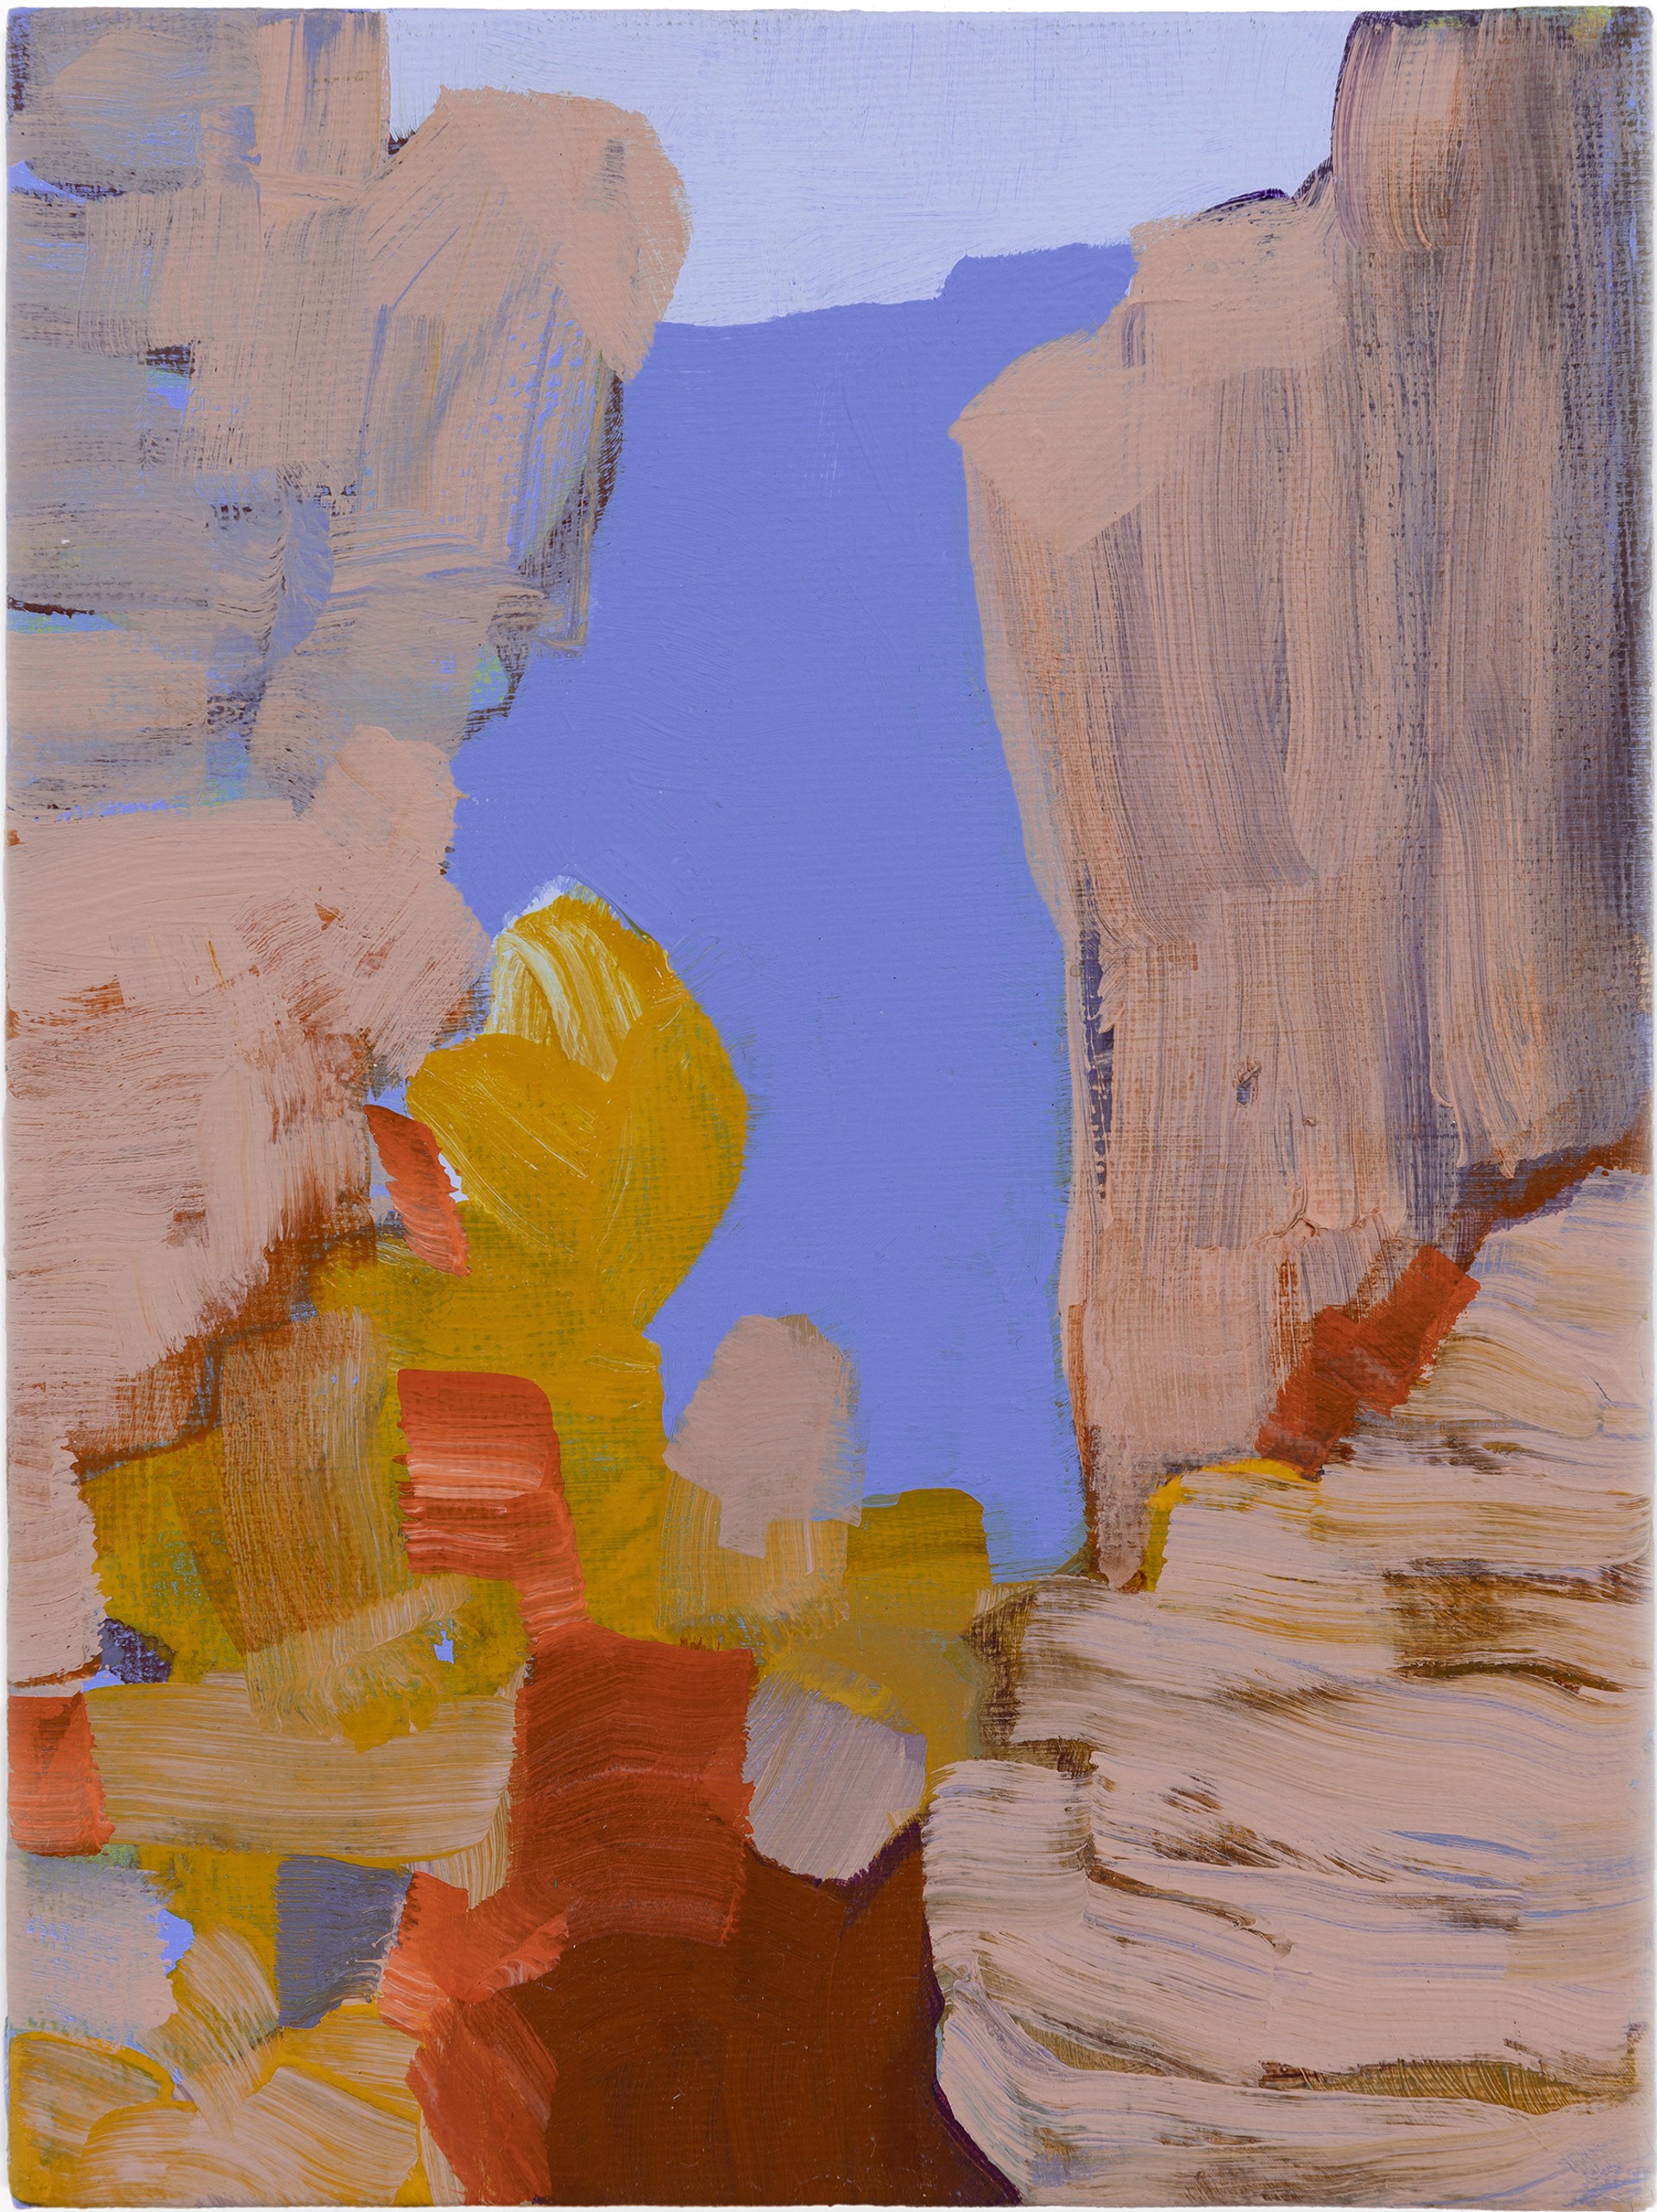 Slot Canyon No. 1 Rose and Cobalt by Ann Marie Nafziger